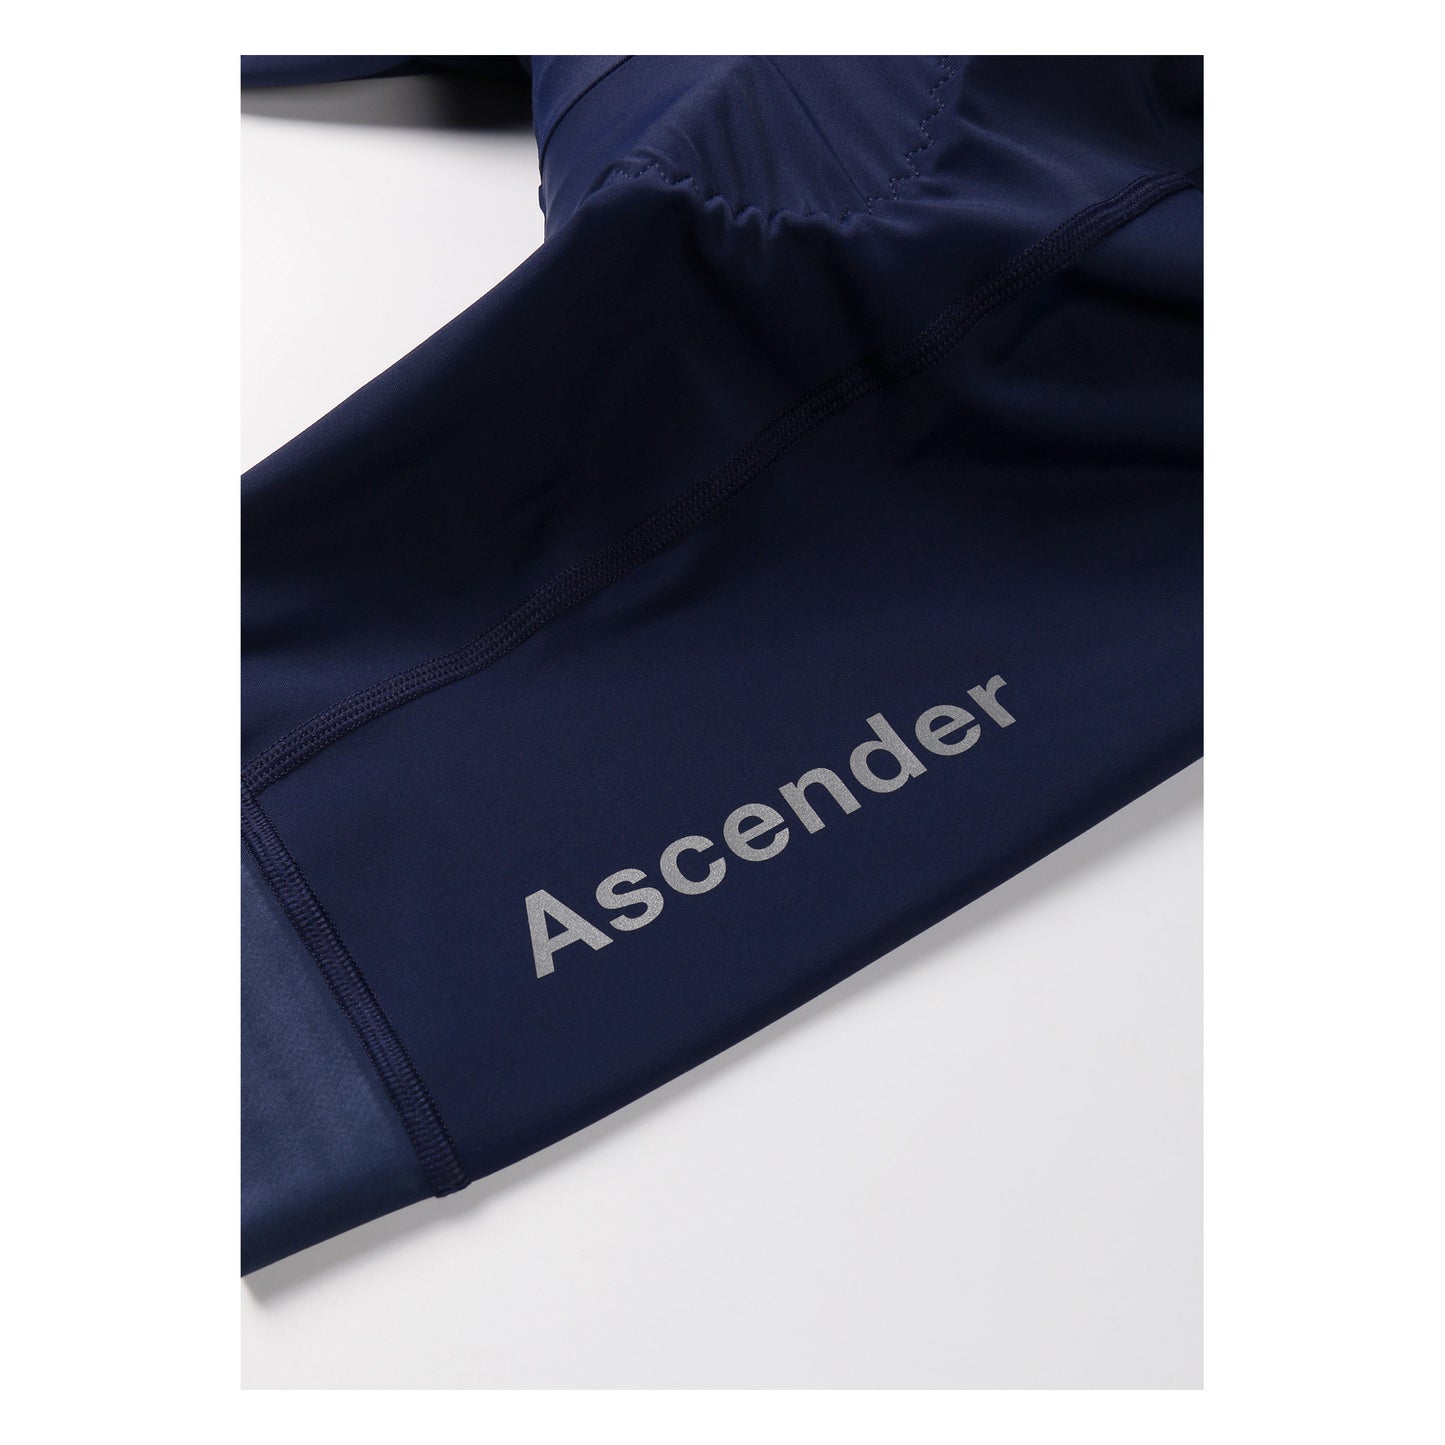 Epona Women Bib Short Navy by Ascender Cycling Club Zürich in Switzerland Front Left with Reflective Logos in Detailled View Ascender Logo Reflective